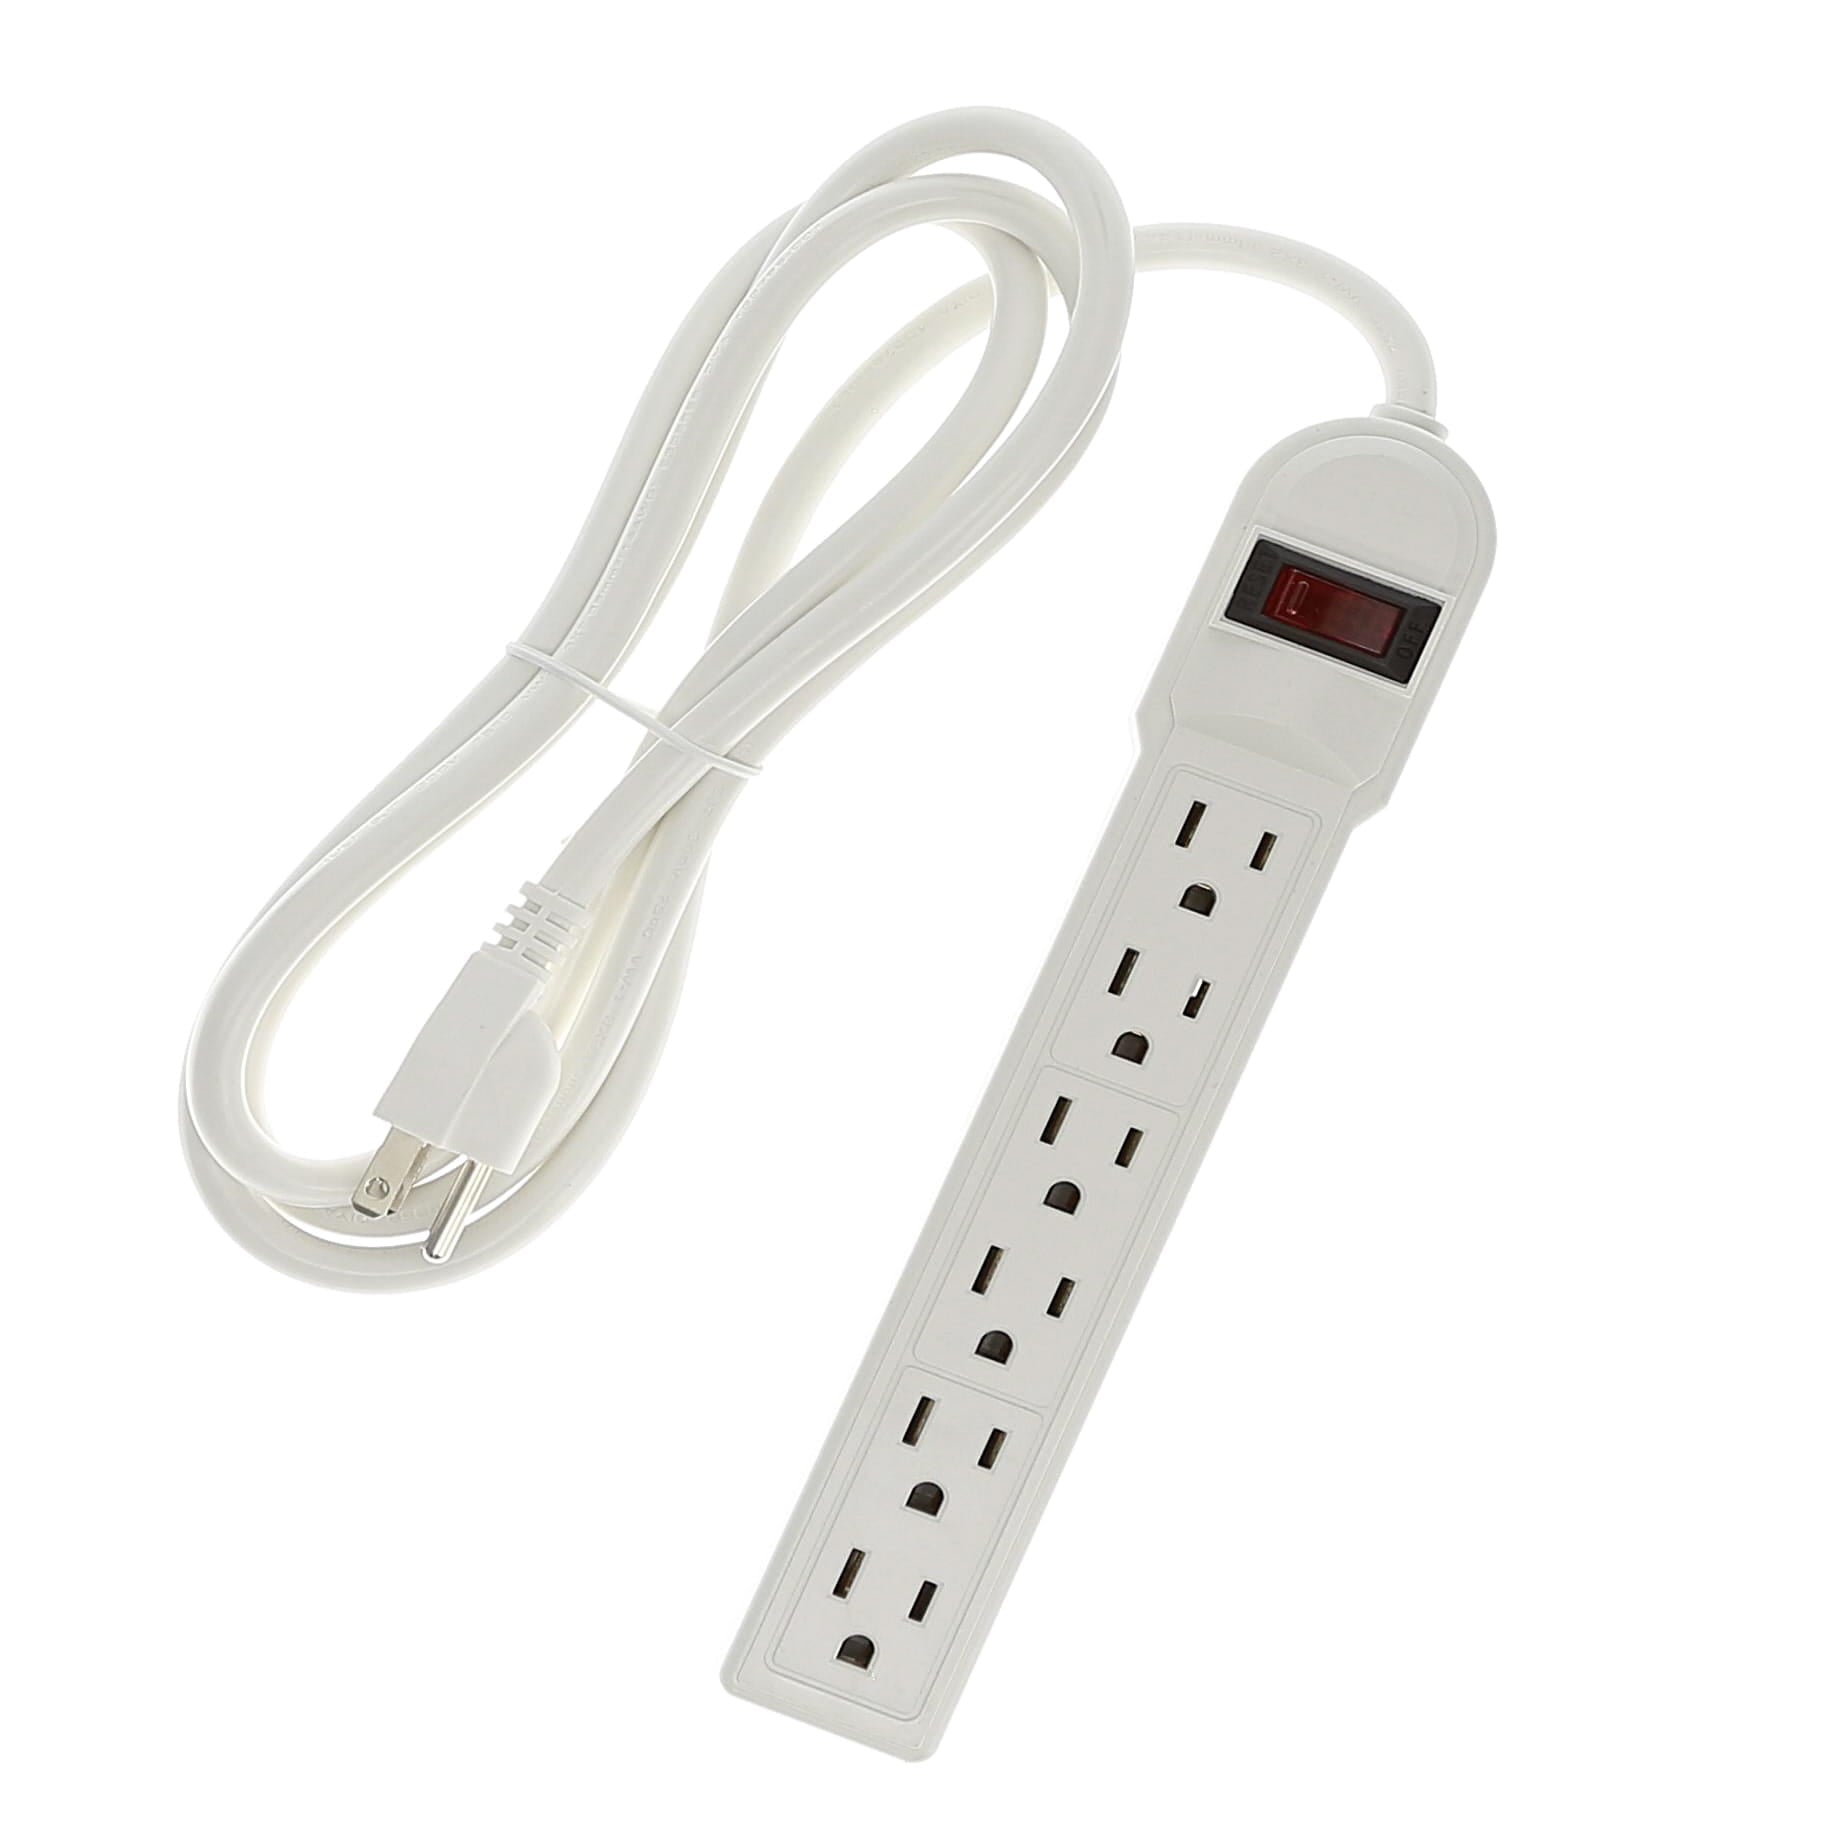 6-Outlet Surge Protector 14AWG/3, 15A, 90J